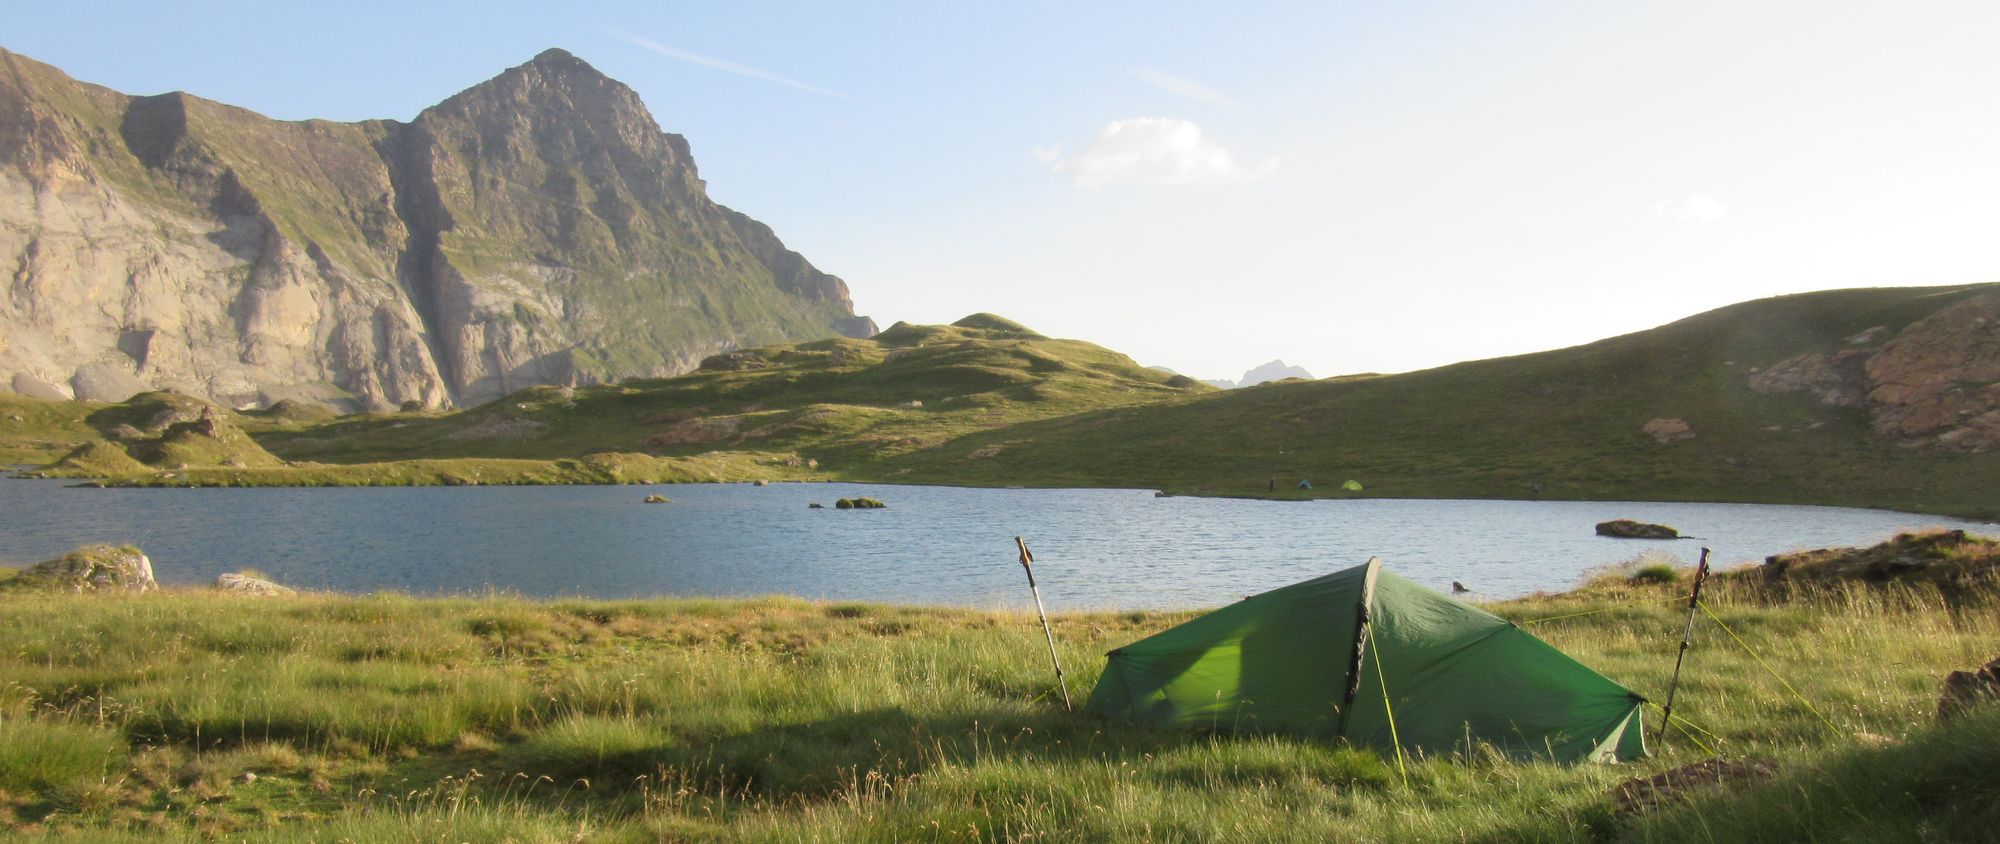 Camped by Lacs de Barroude in the morning.